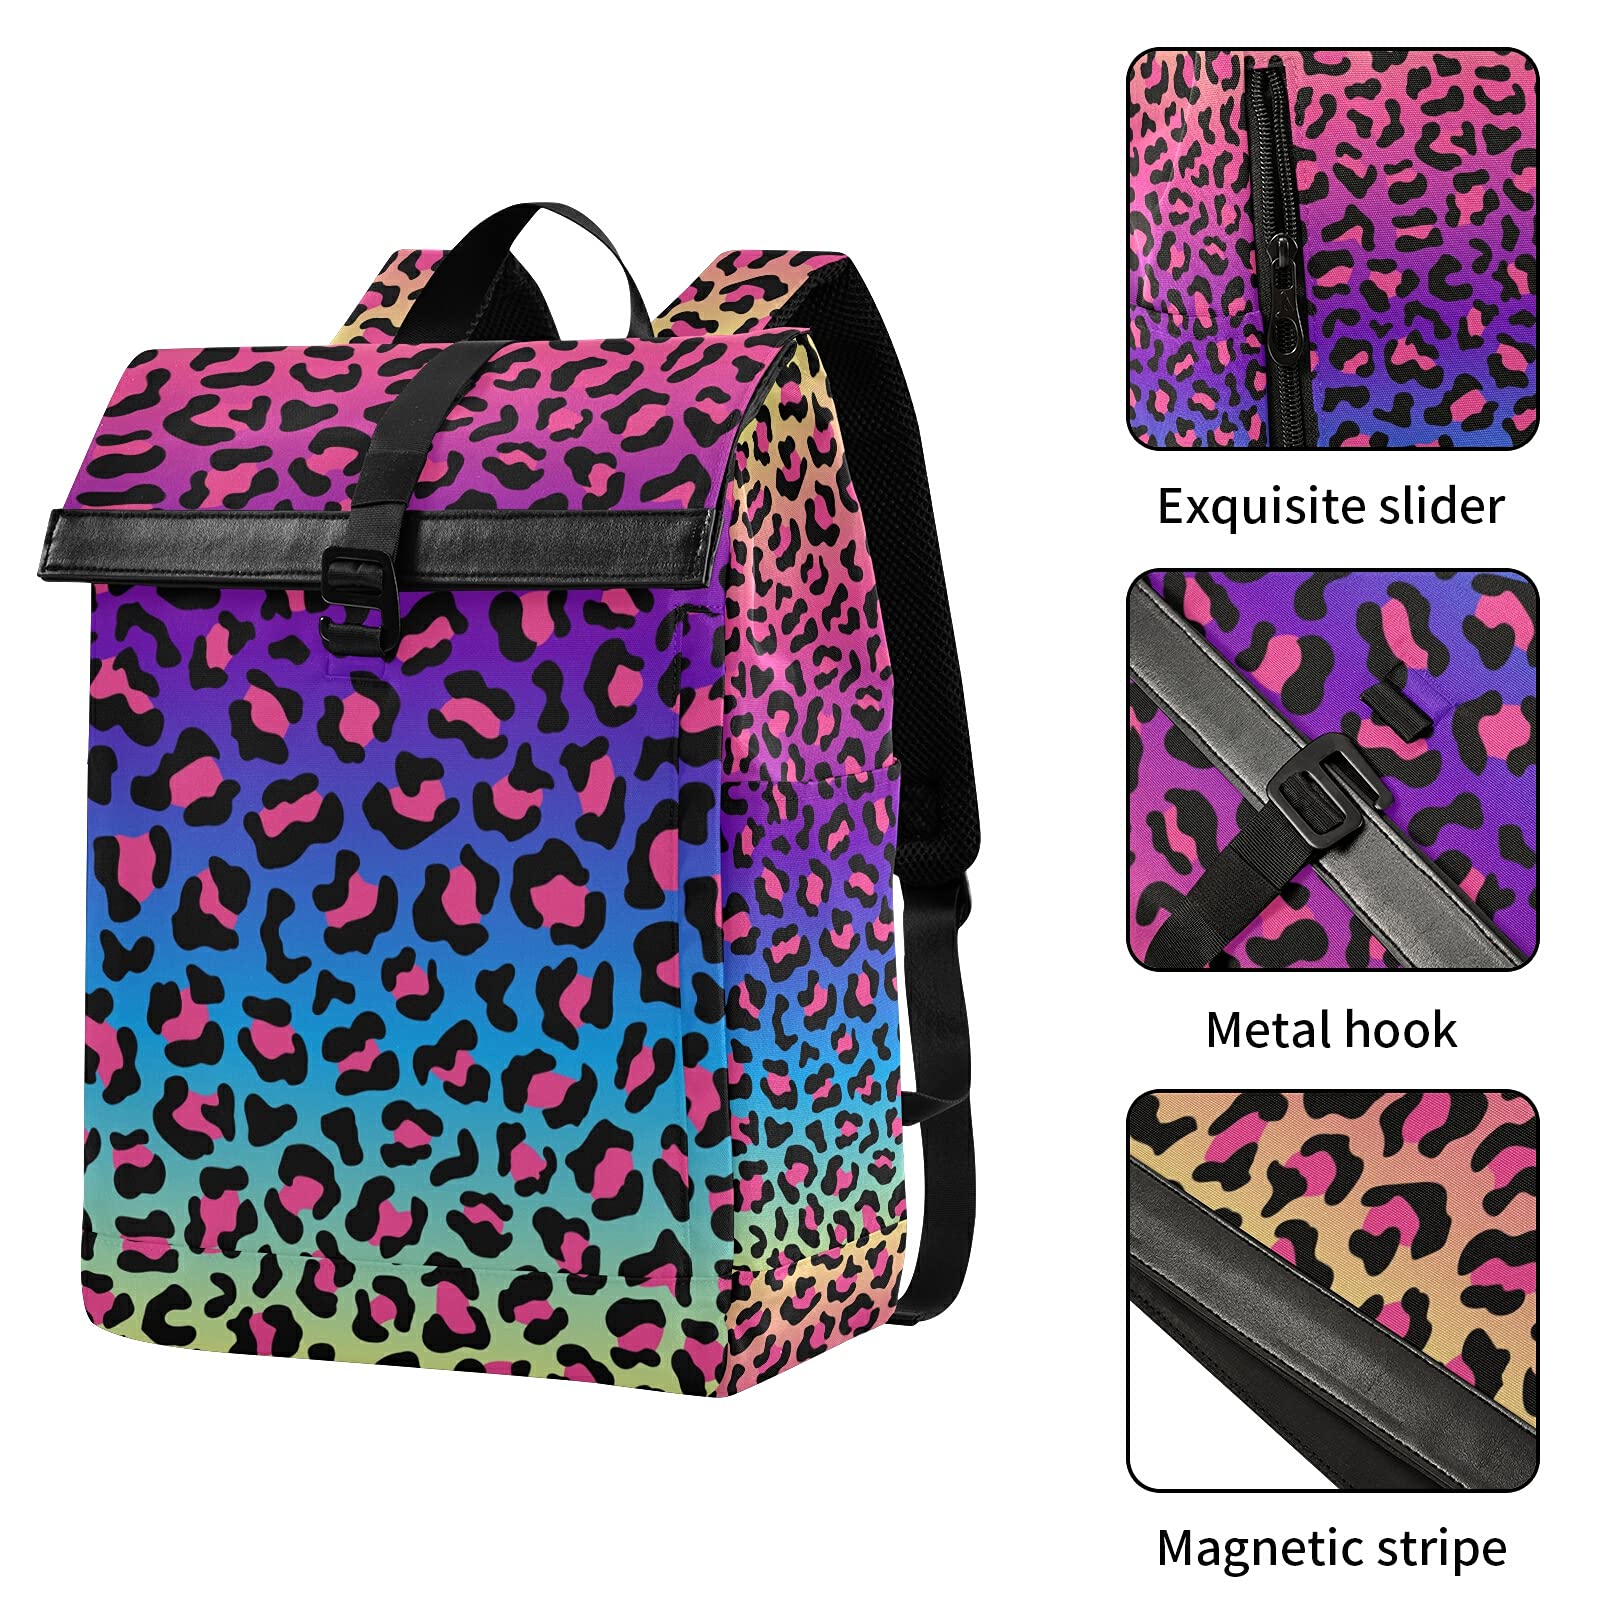 ALAZA Neon Rainbow Leopard Cheetah Large Laptop Backpack Purse for Women Men Waterproof Anti Theft Roll Top Backpack, 13 - 17.3 inch, Multi, One Size